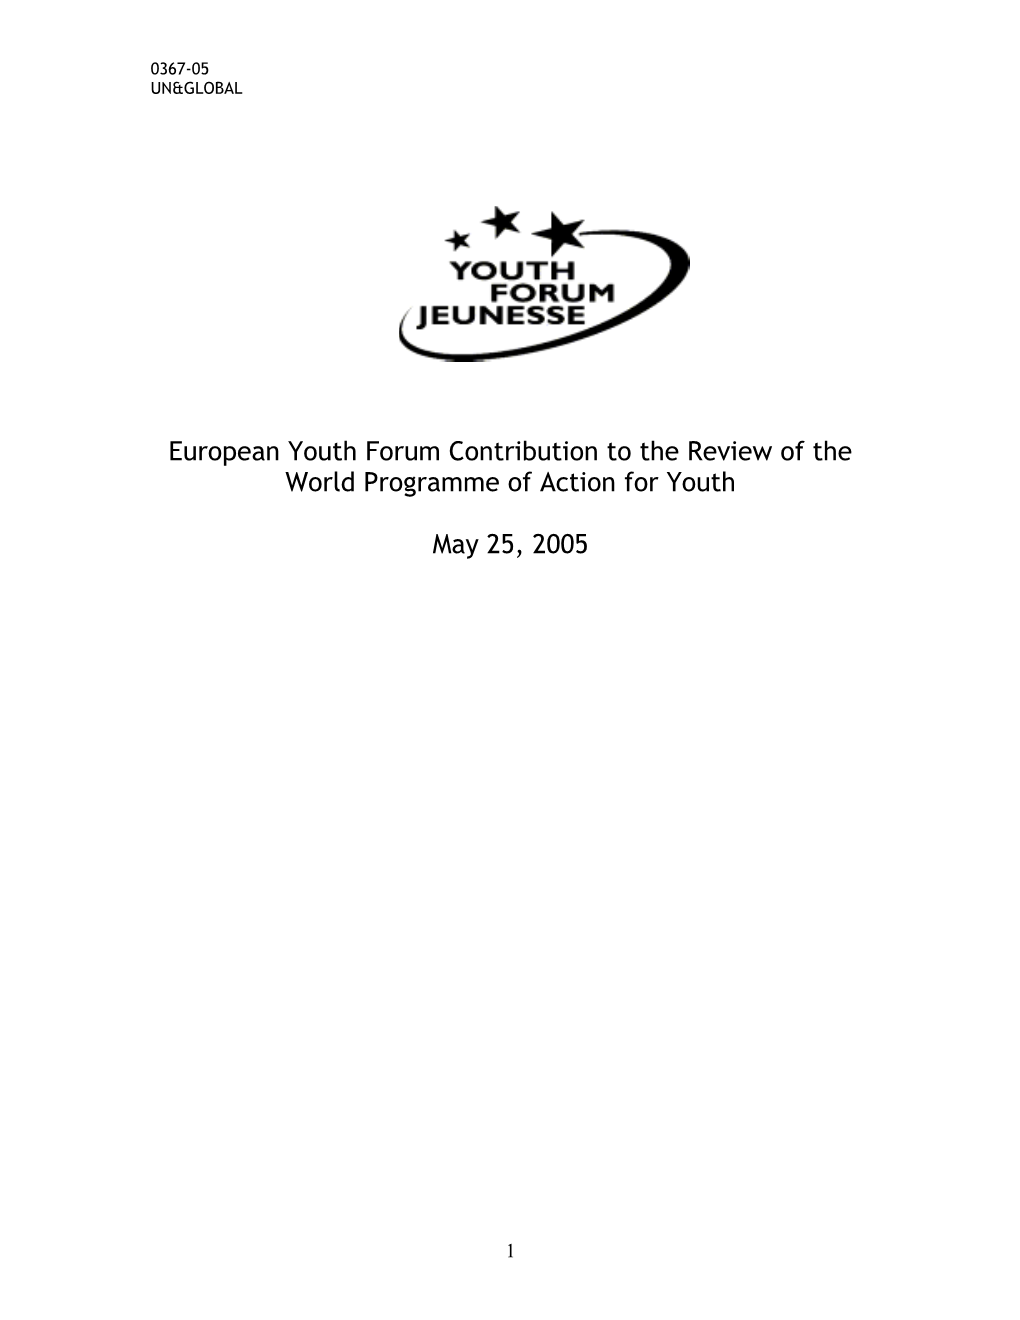 European Youth Forum Contribution to the Review of the World Programme of Action for Youth